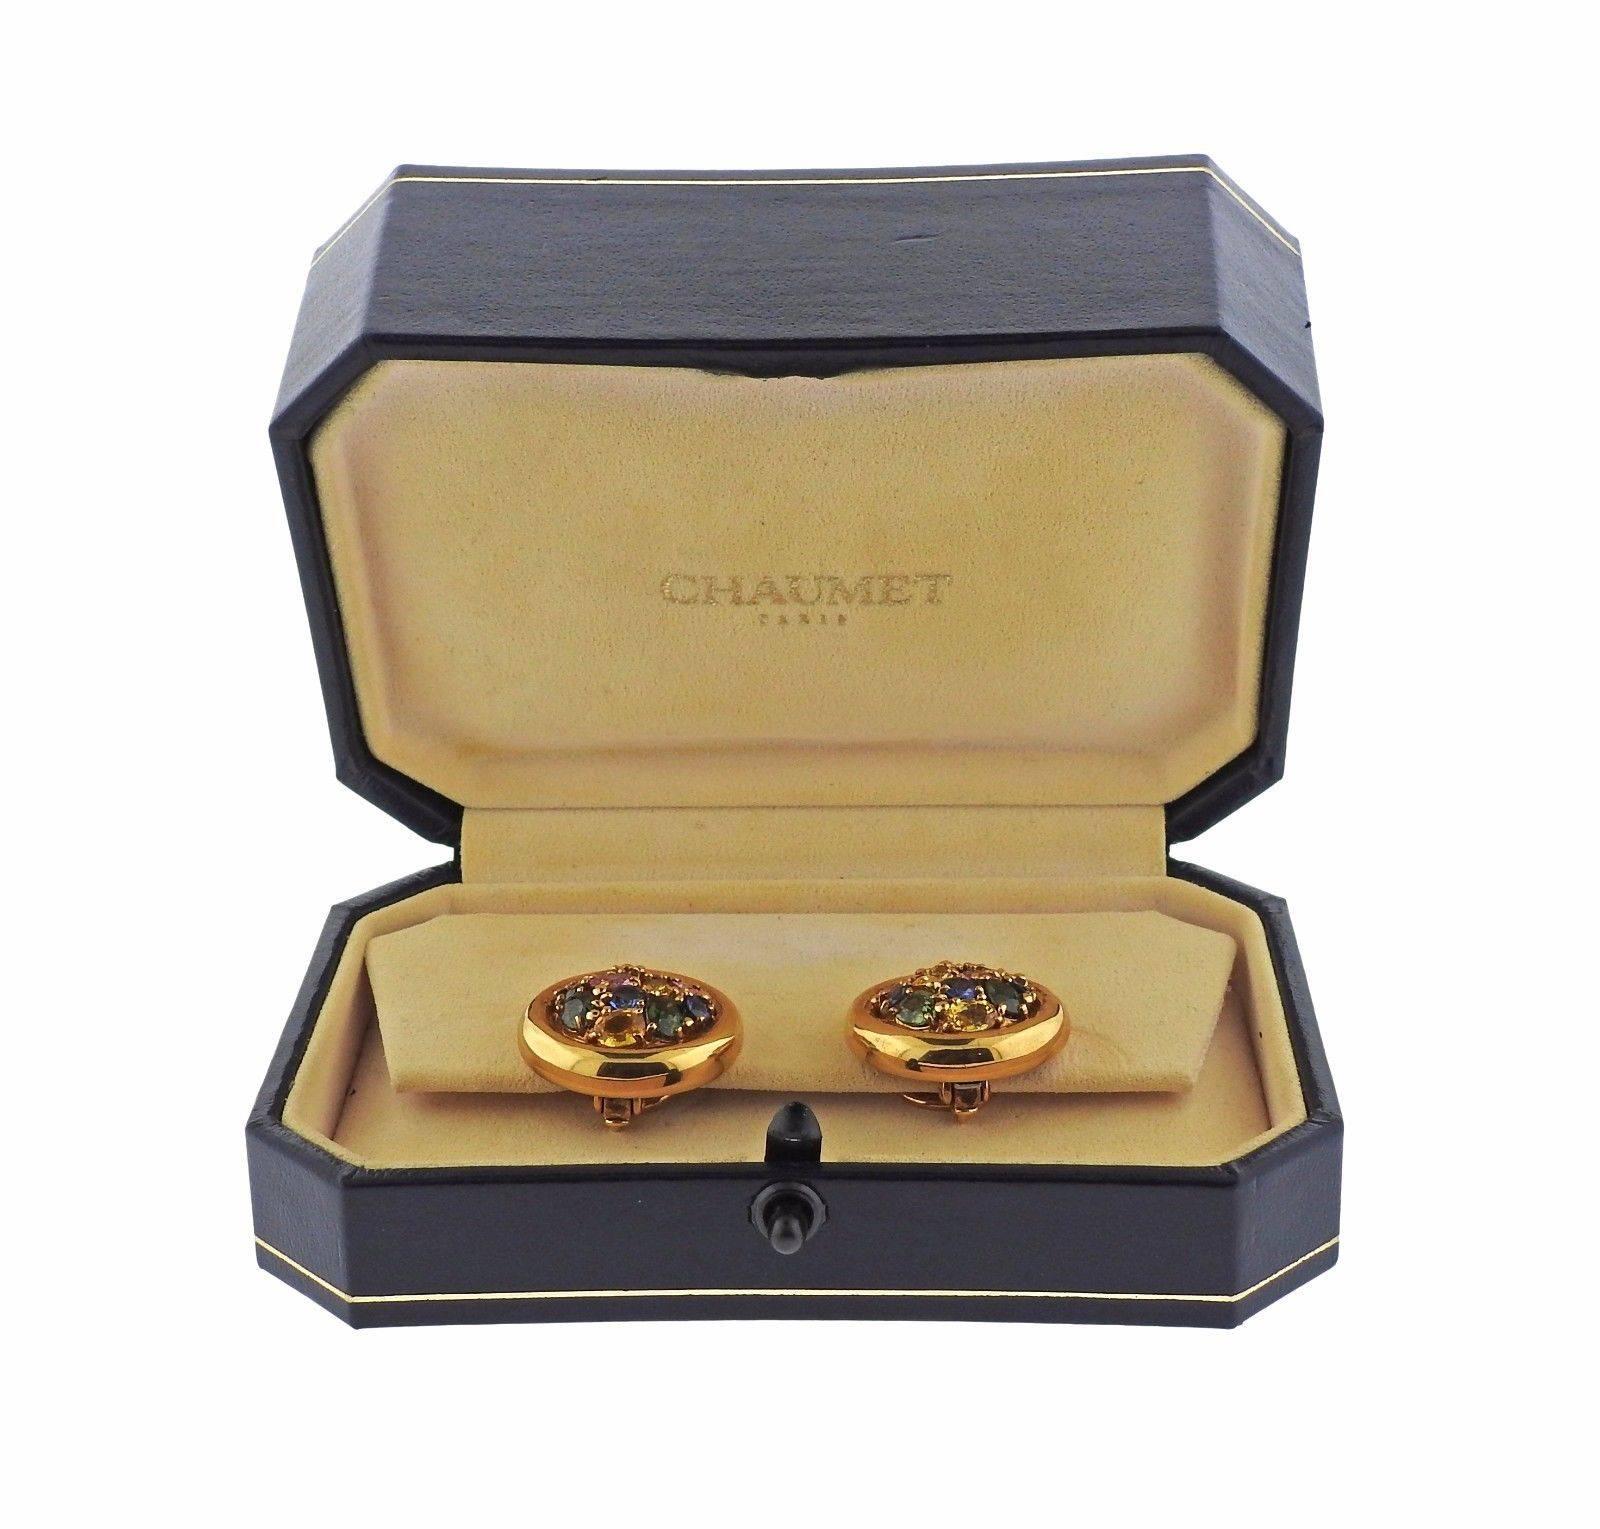 A pair of 18k yellow gold earrings set with multi color sapphires.  The earrings measure 22mm in diameter and weigh 21.3 grams.  Marked: Chaumet, Paris, 143436, or750. Come with original box.